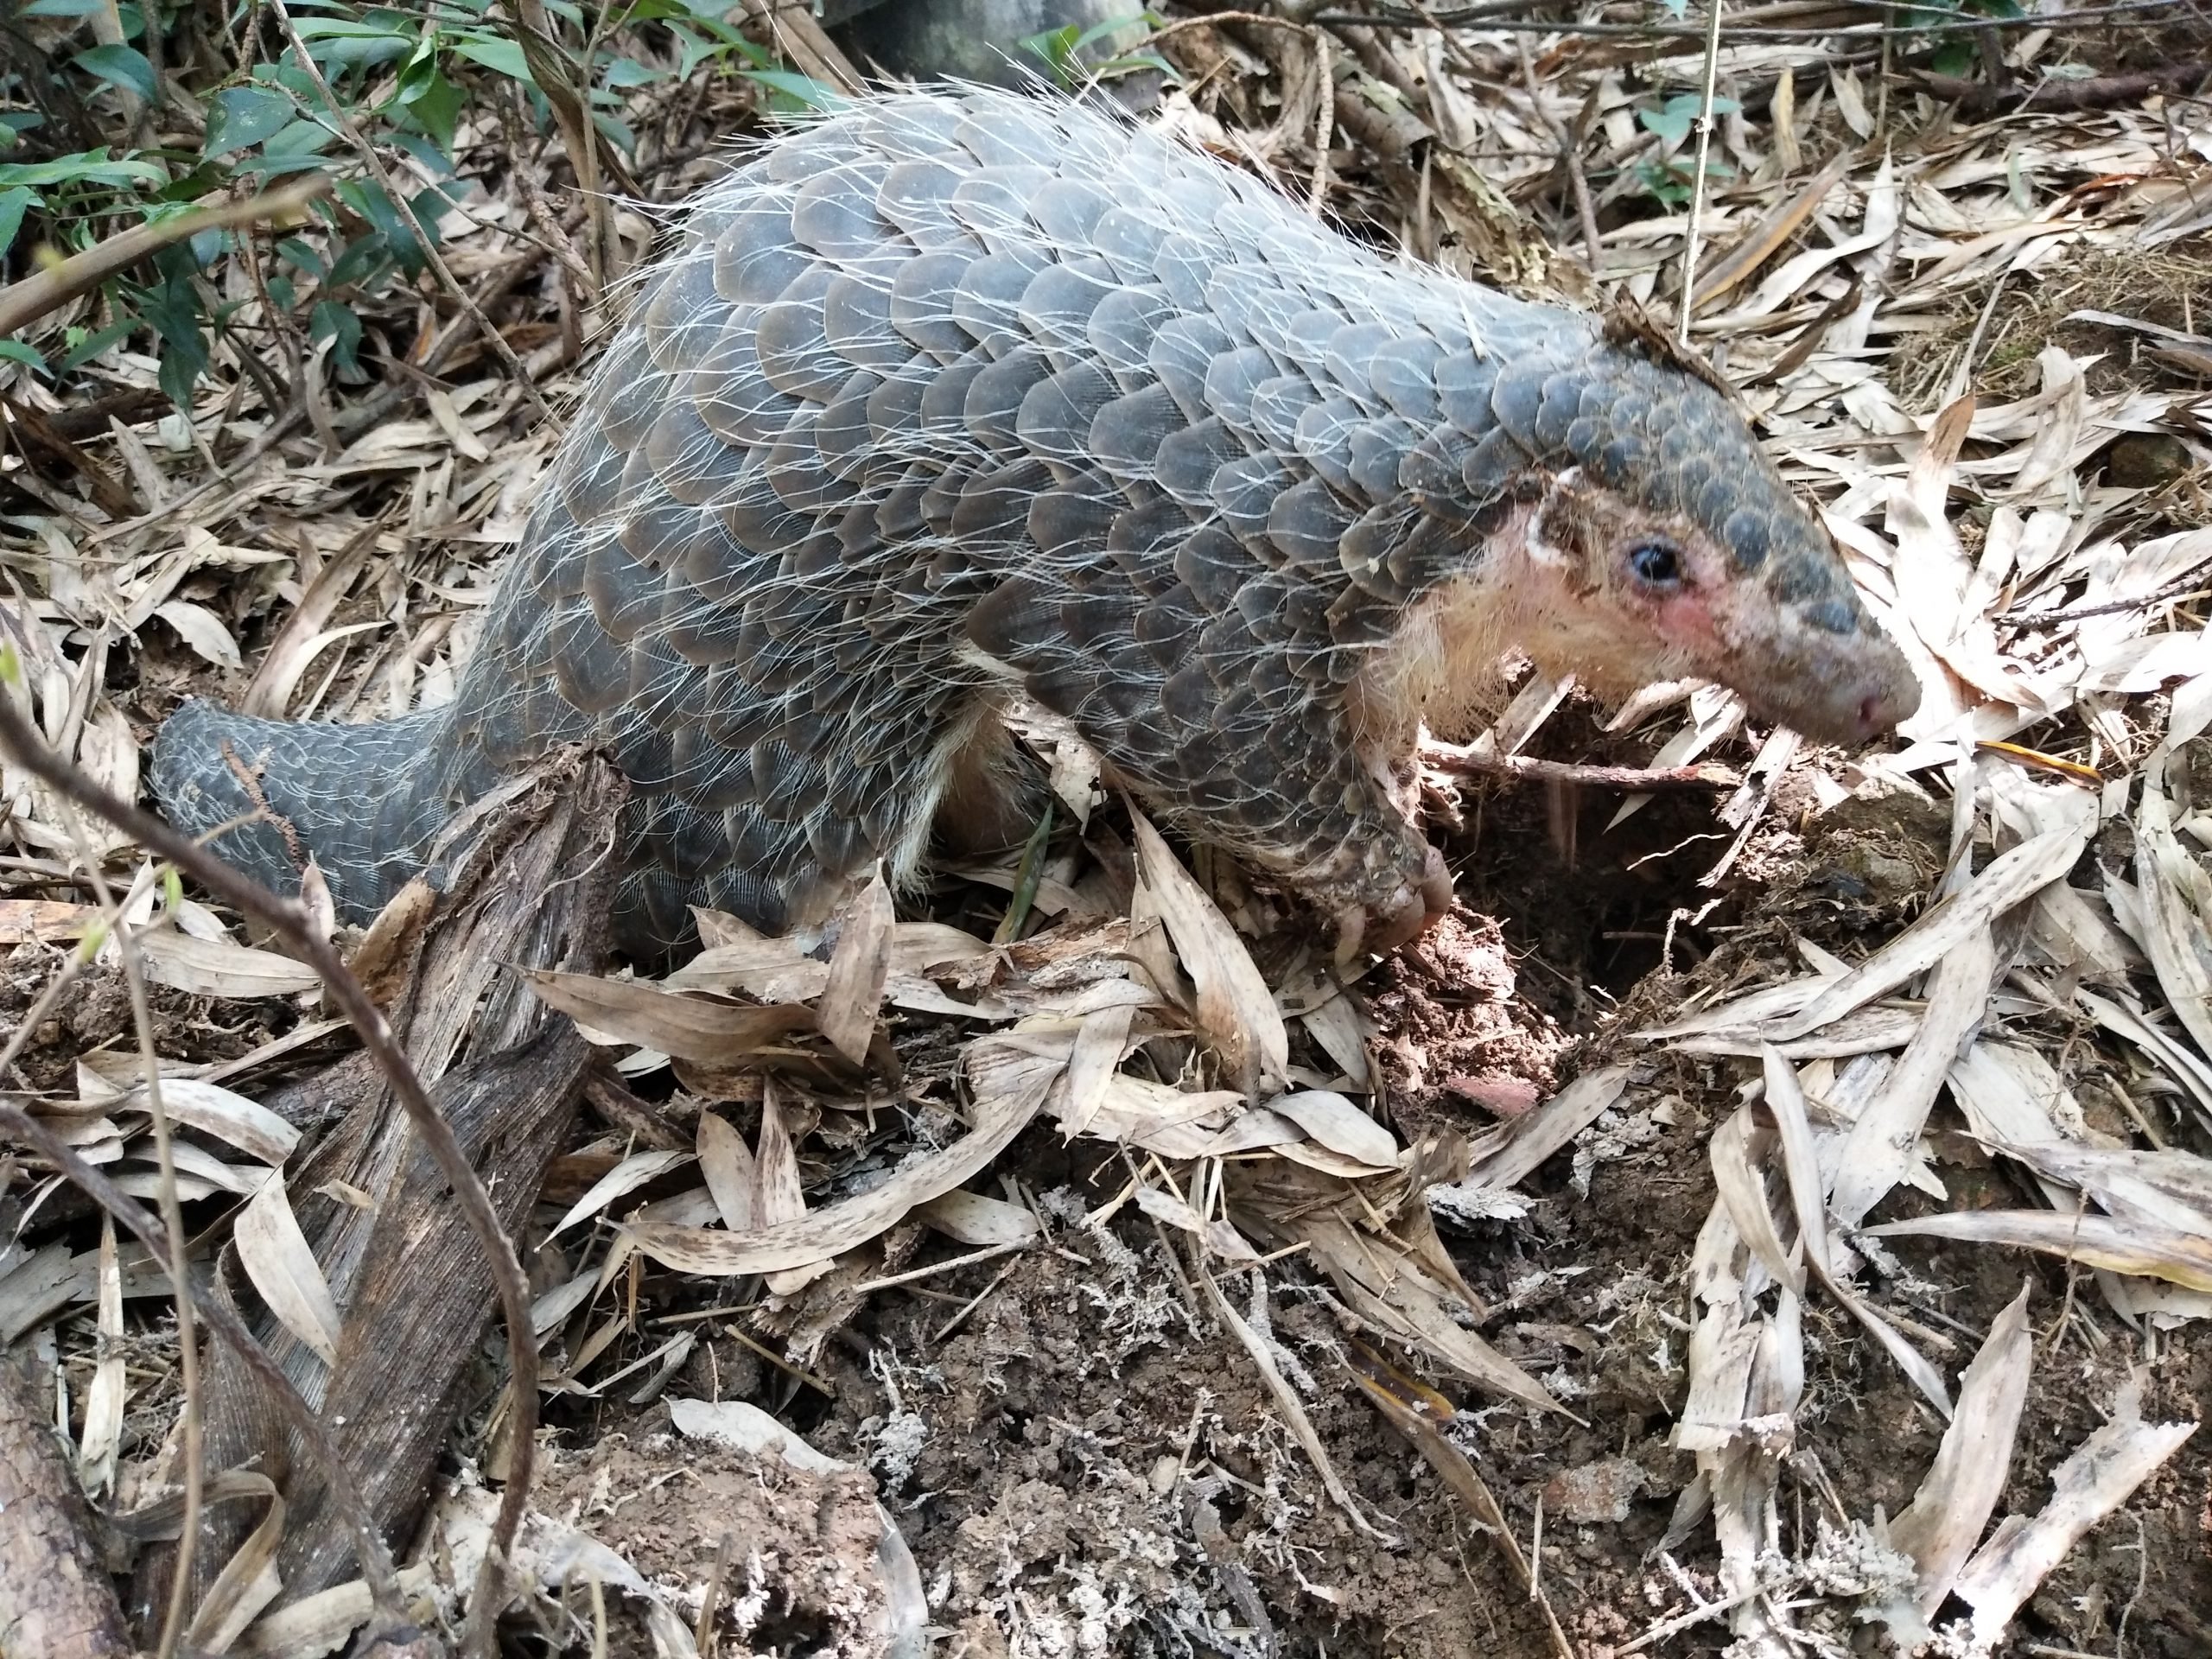 Pangolin in China. They are the most trafficked creatures in the world, valued for their meat and their supposed medical properties [image by: Wang Yan]